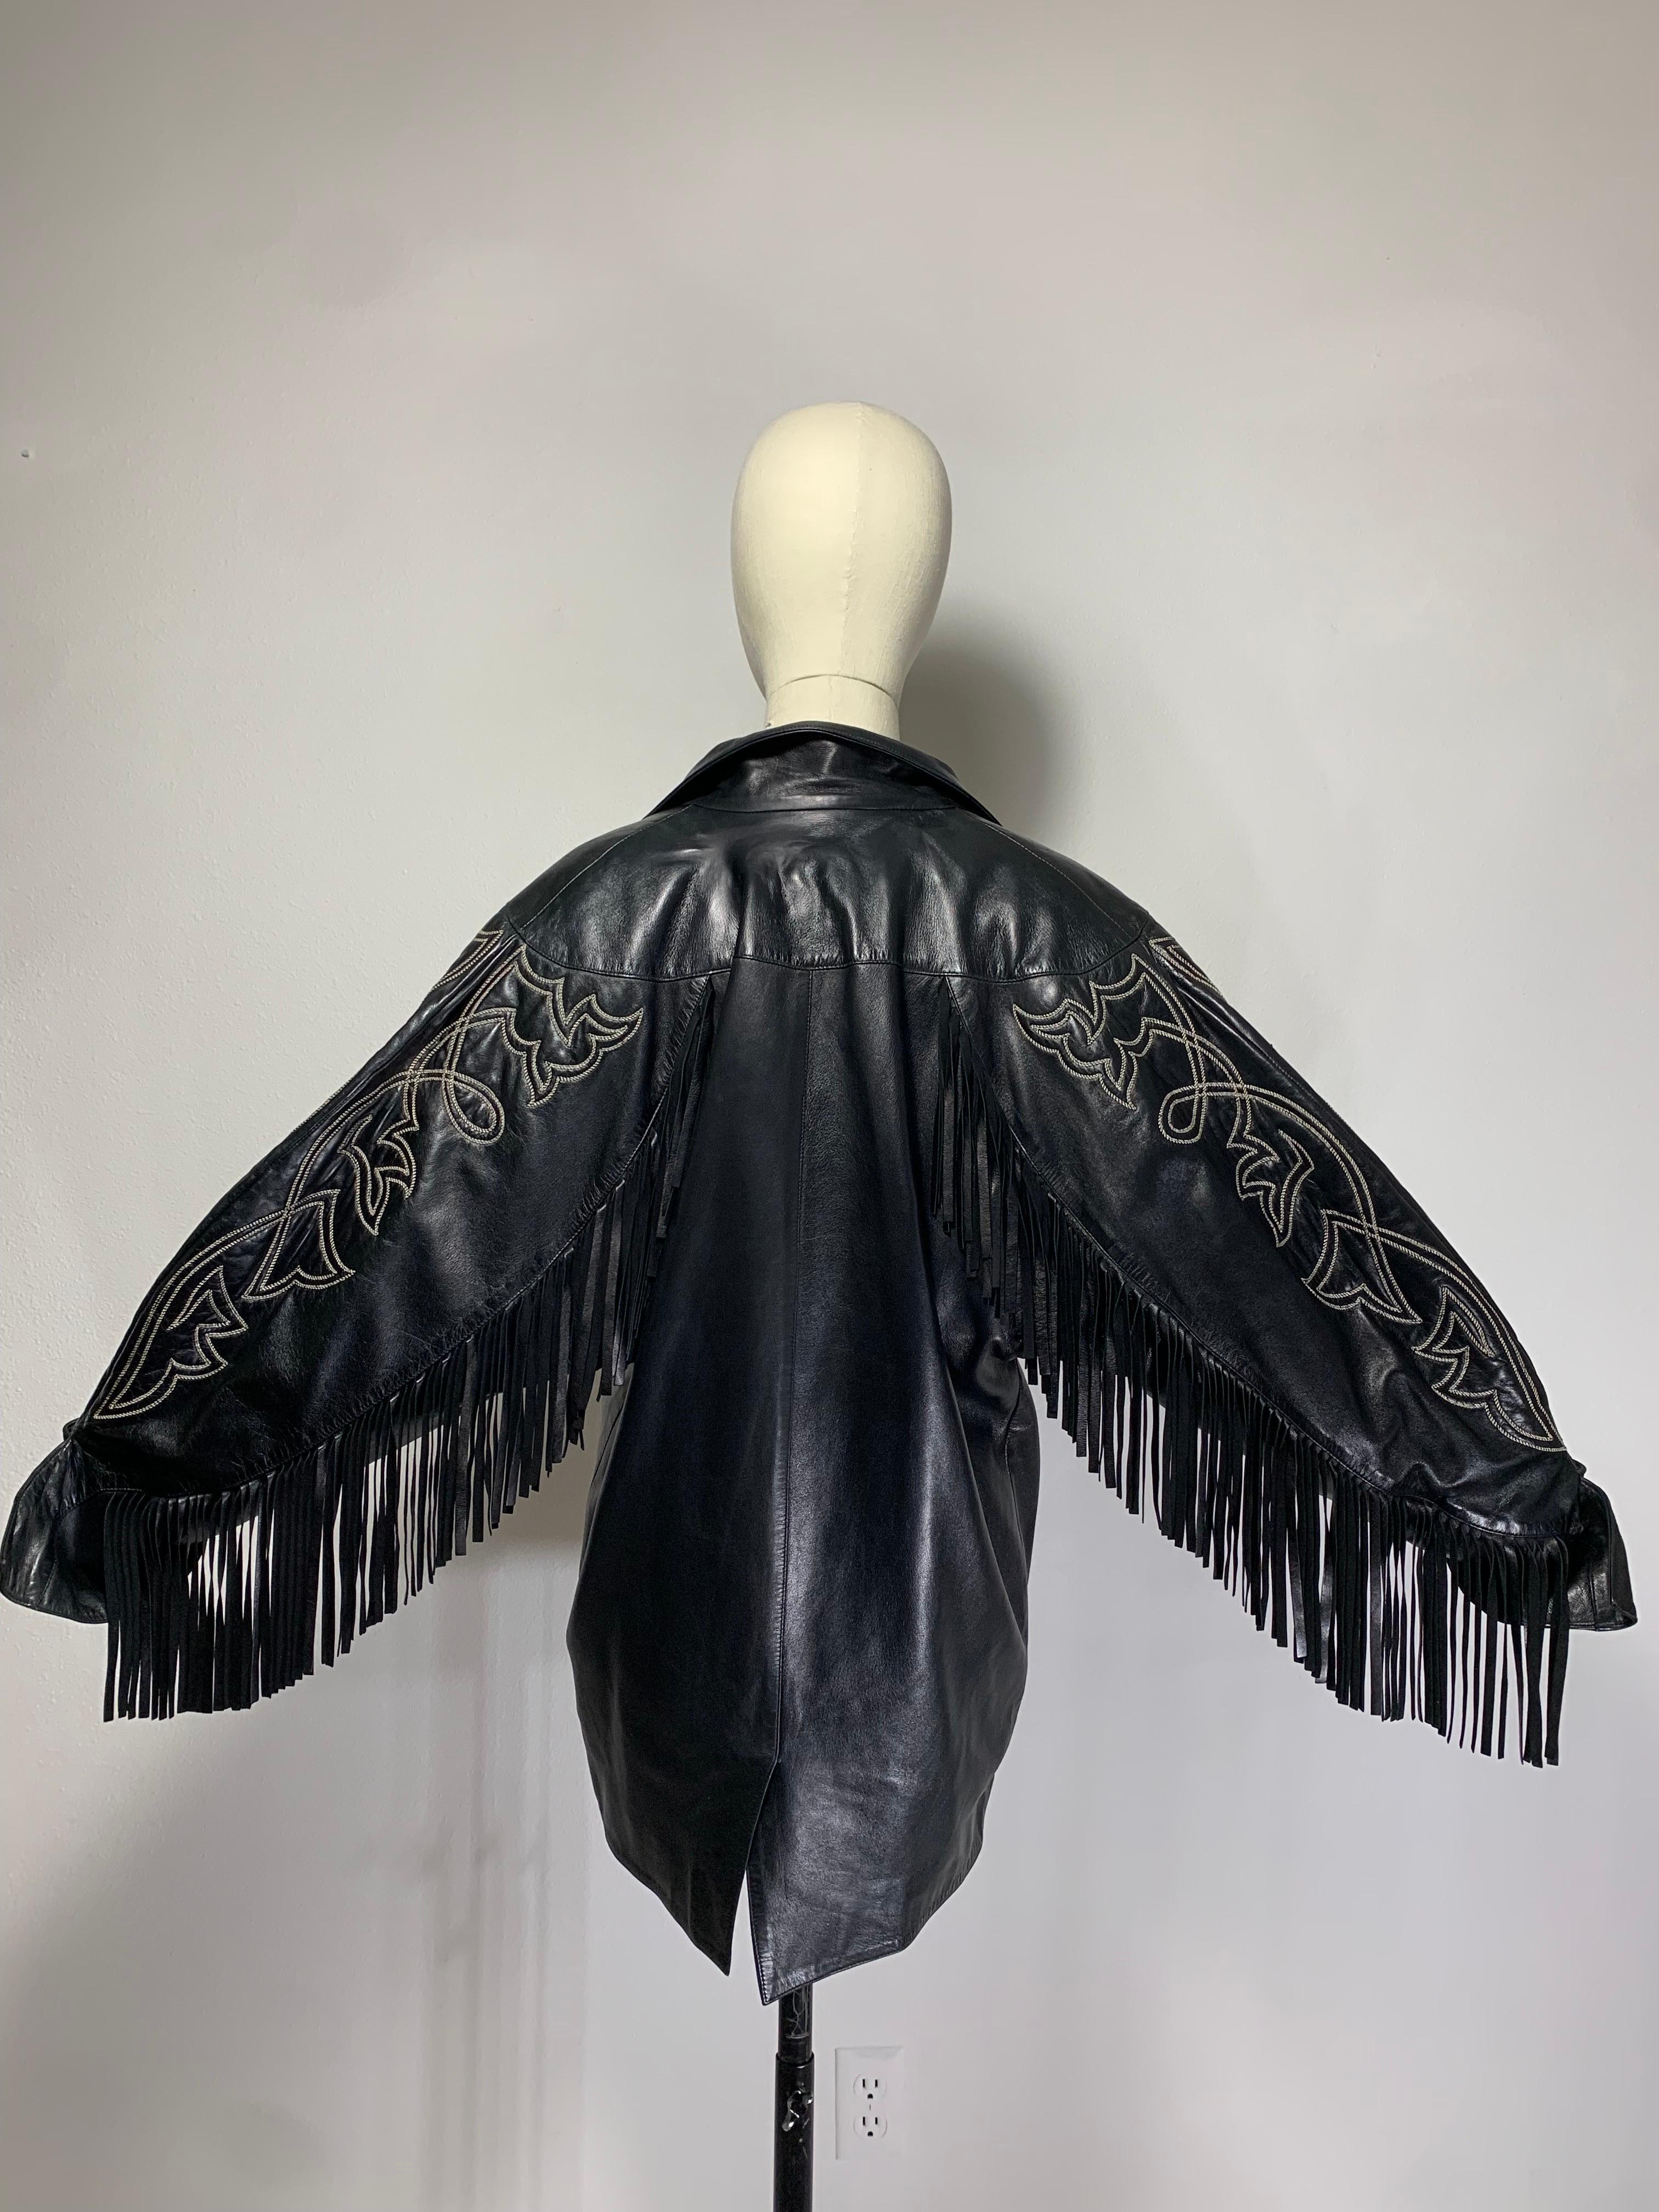 1980s Claude Montana Fine Black Lambskin Leather Fringed Dolman Jacket w Western Stitching:  Fabulous and dramatic styling from a master of outerwear design!  Dolman sleeved jacket with heavily fringed arms and white Western-style stitch designs. 